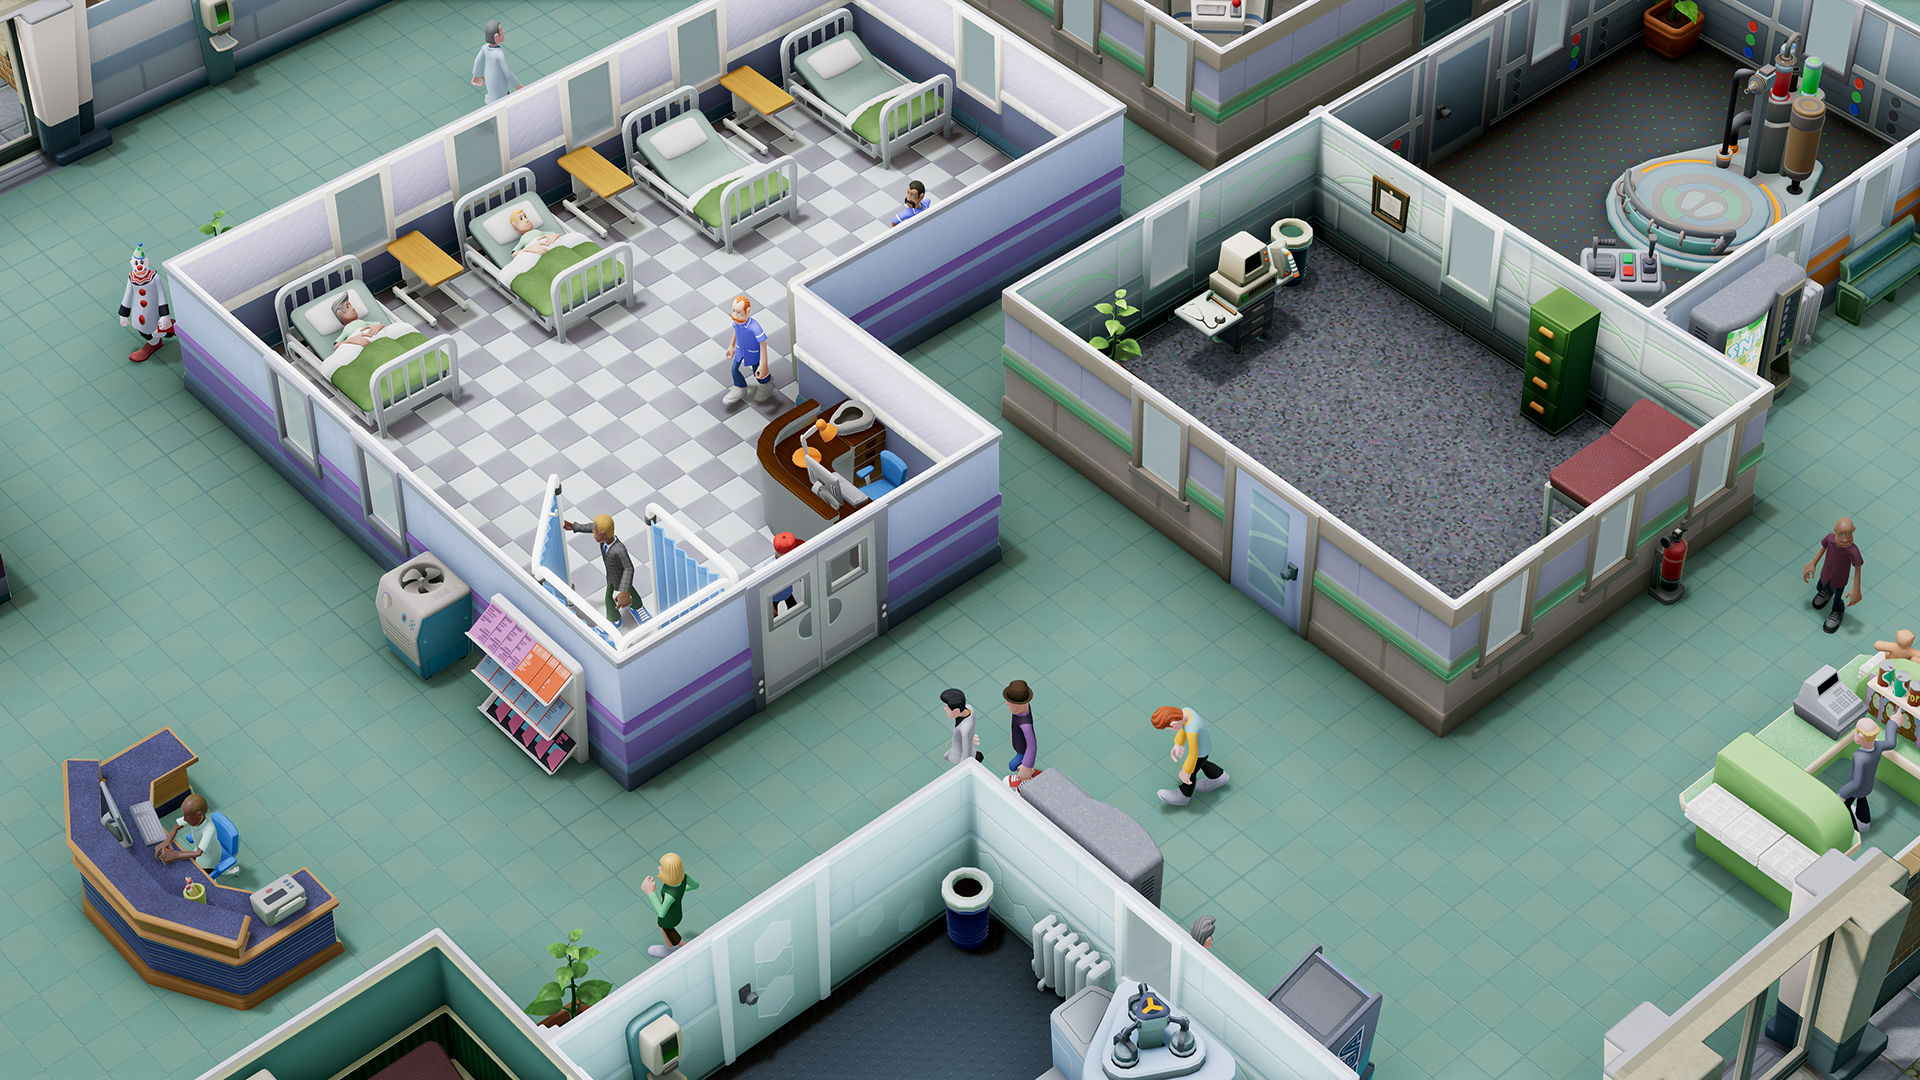 Two Point Hospital 1